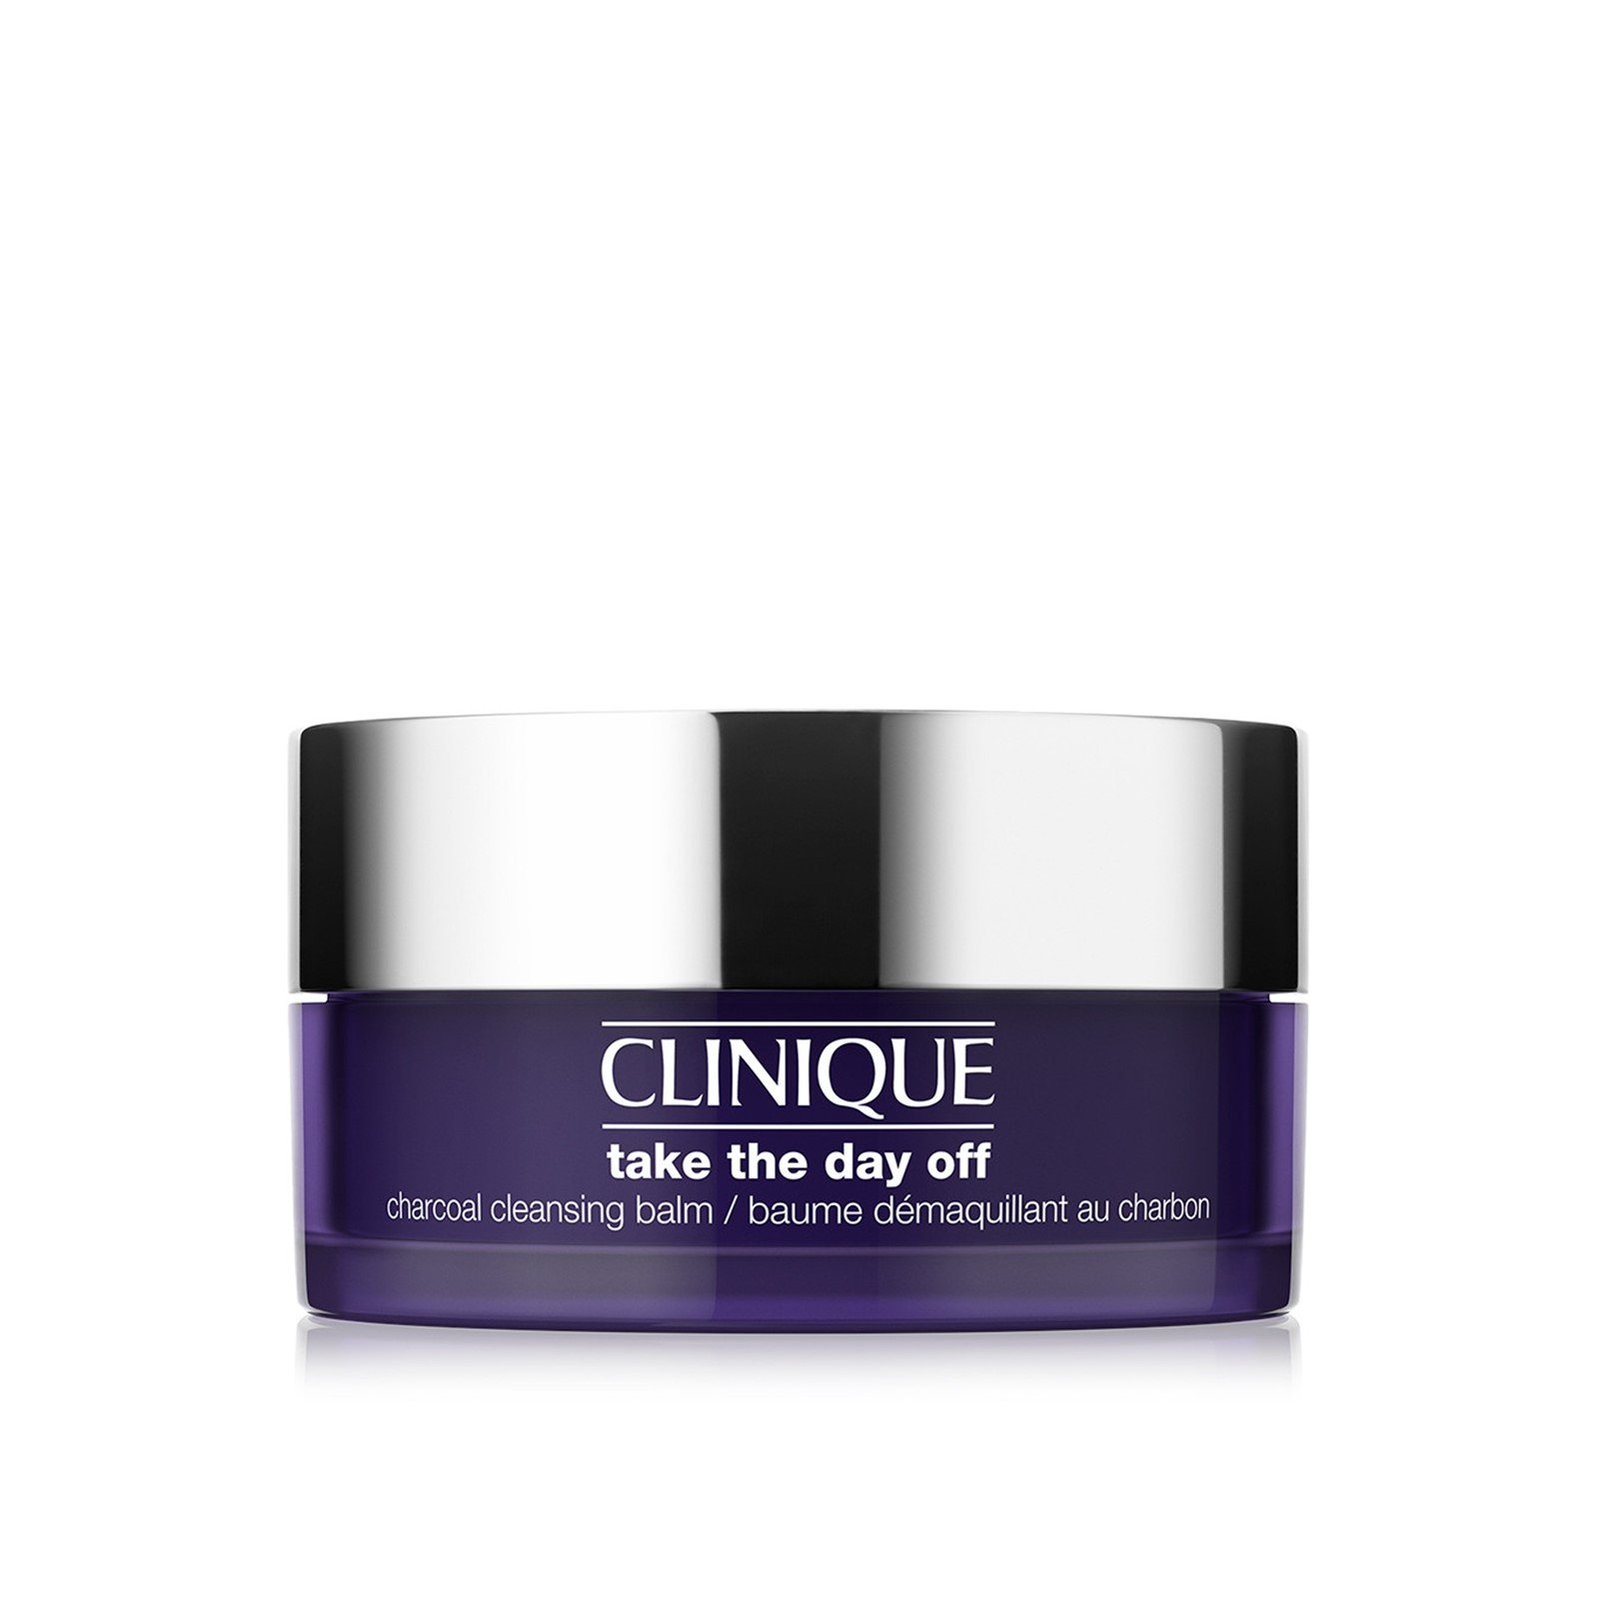 Clinique Take The Day Off Charcoal Cleansing Balm 125ml (4.2oz)